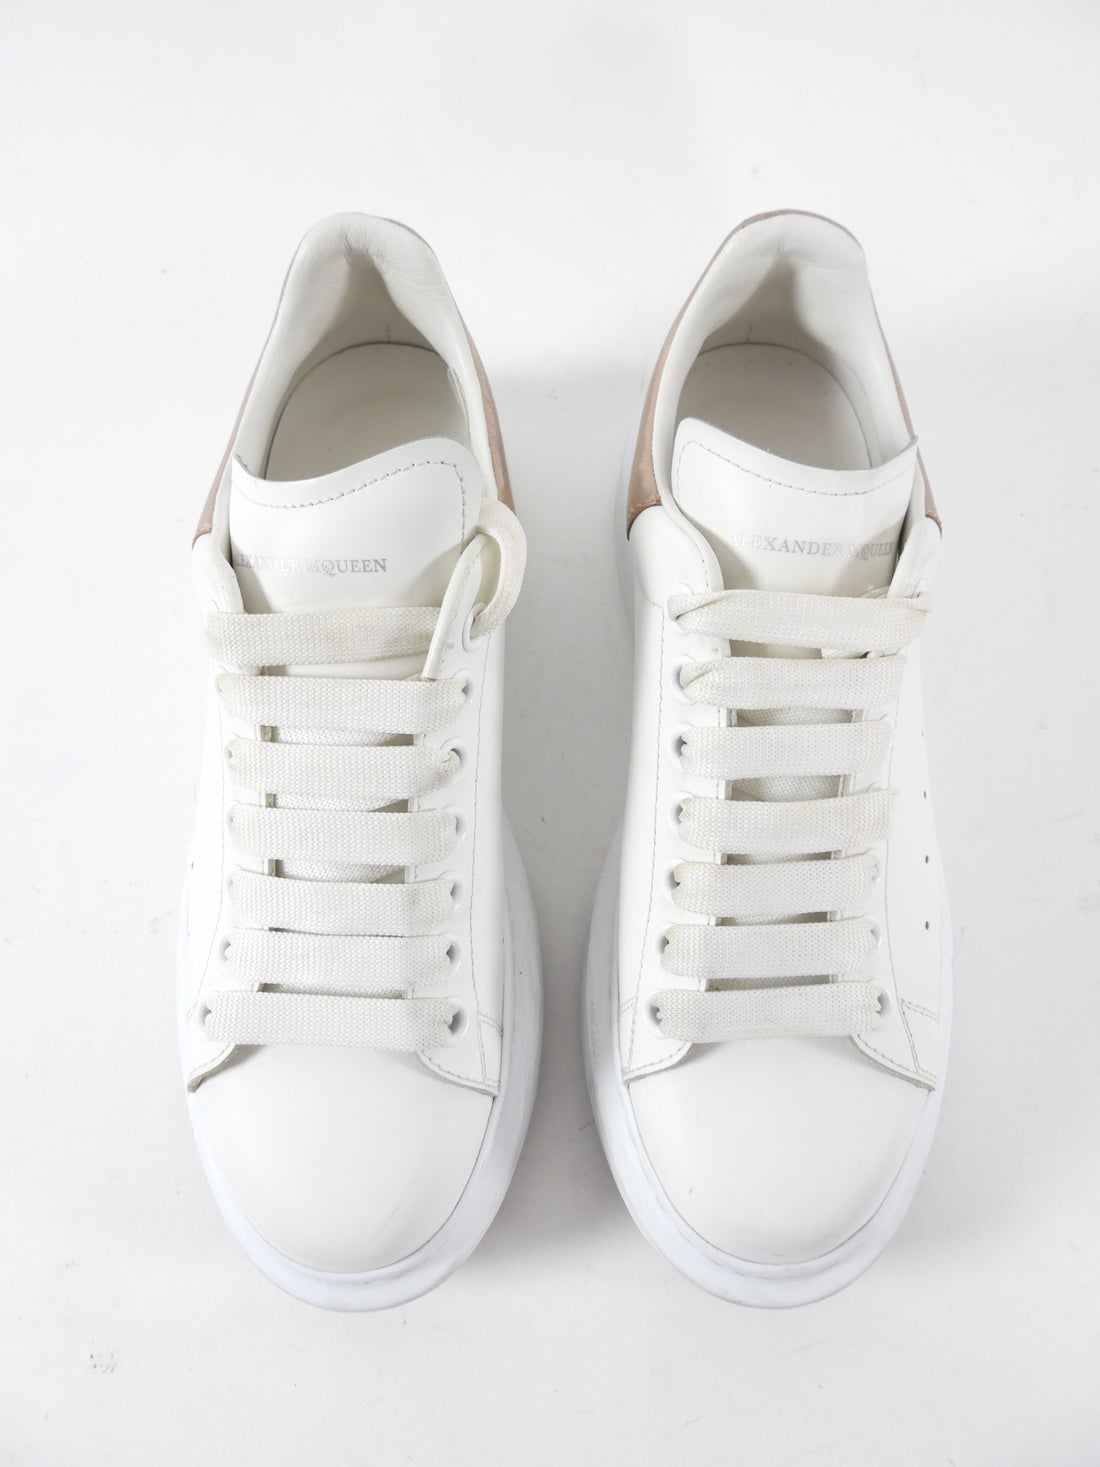 Alexander McQueen White Chunky Sneakers - 39 / USA 8.5